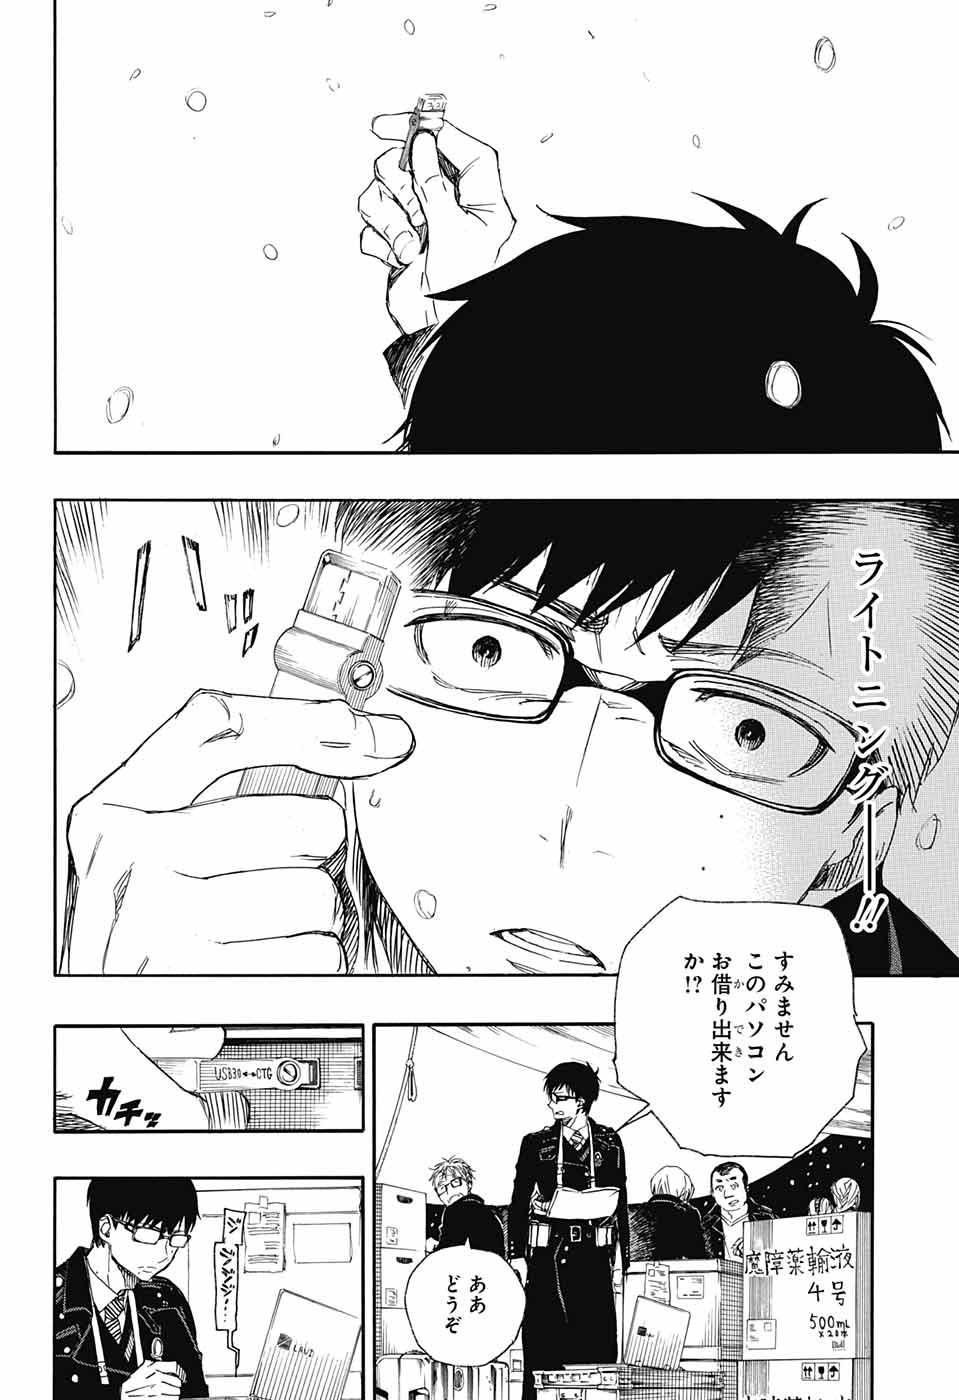 Ao no Exorcist - Chapter 92 - Page 34